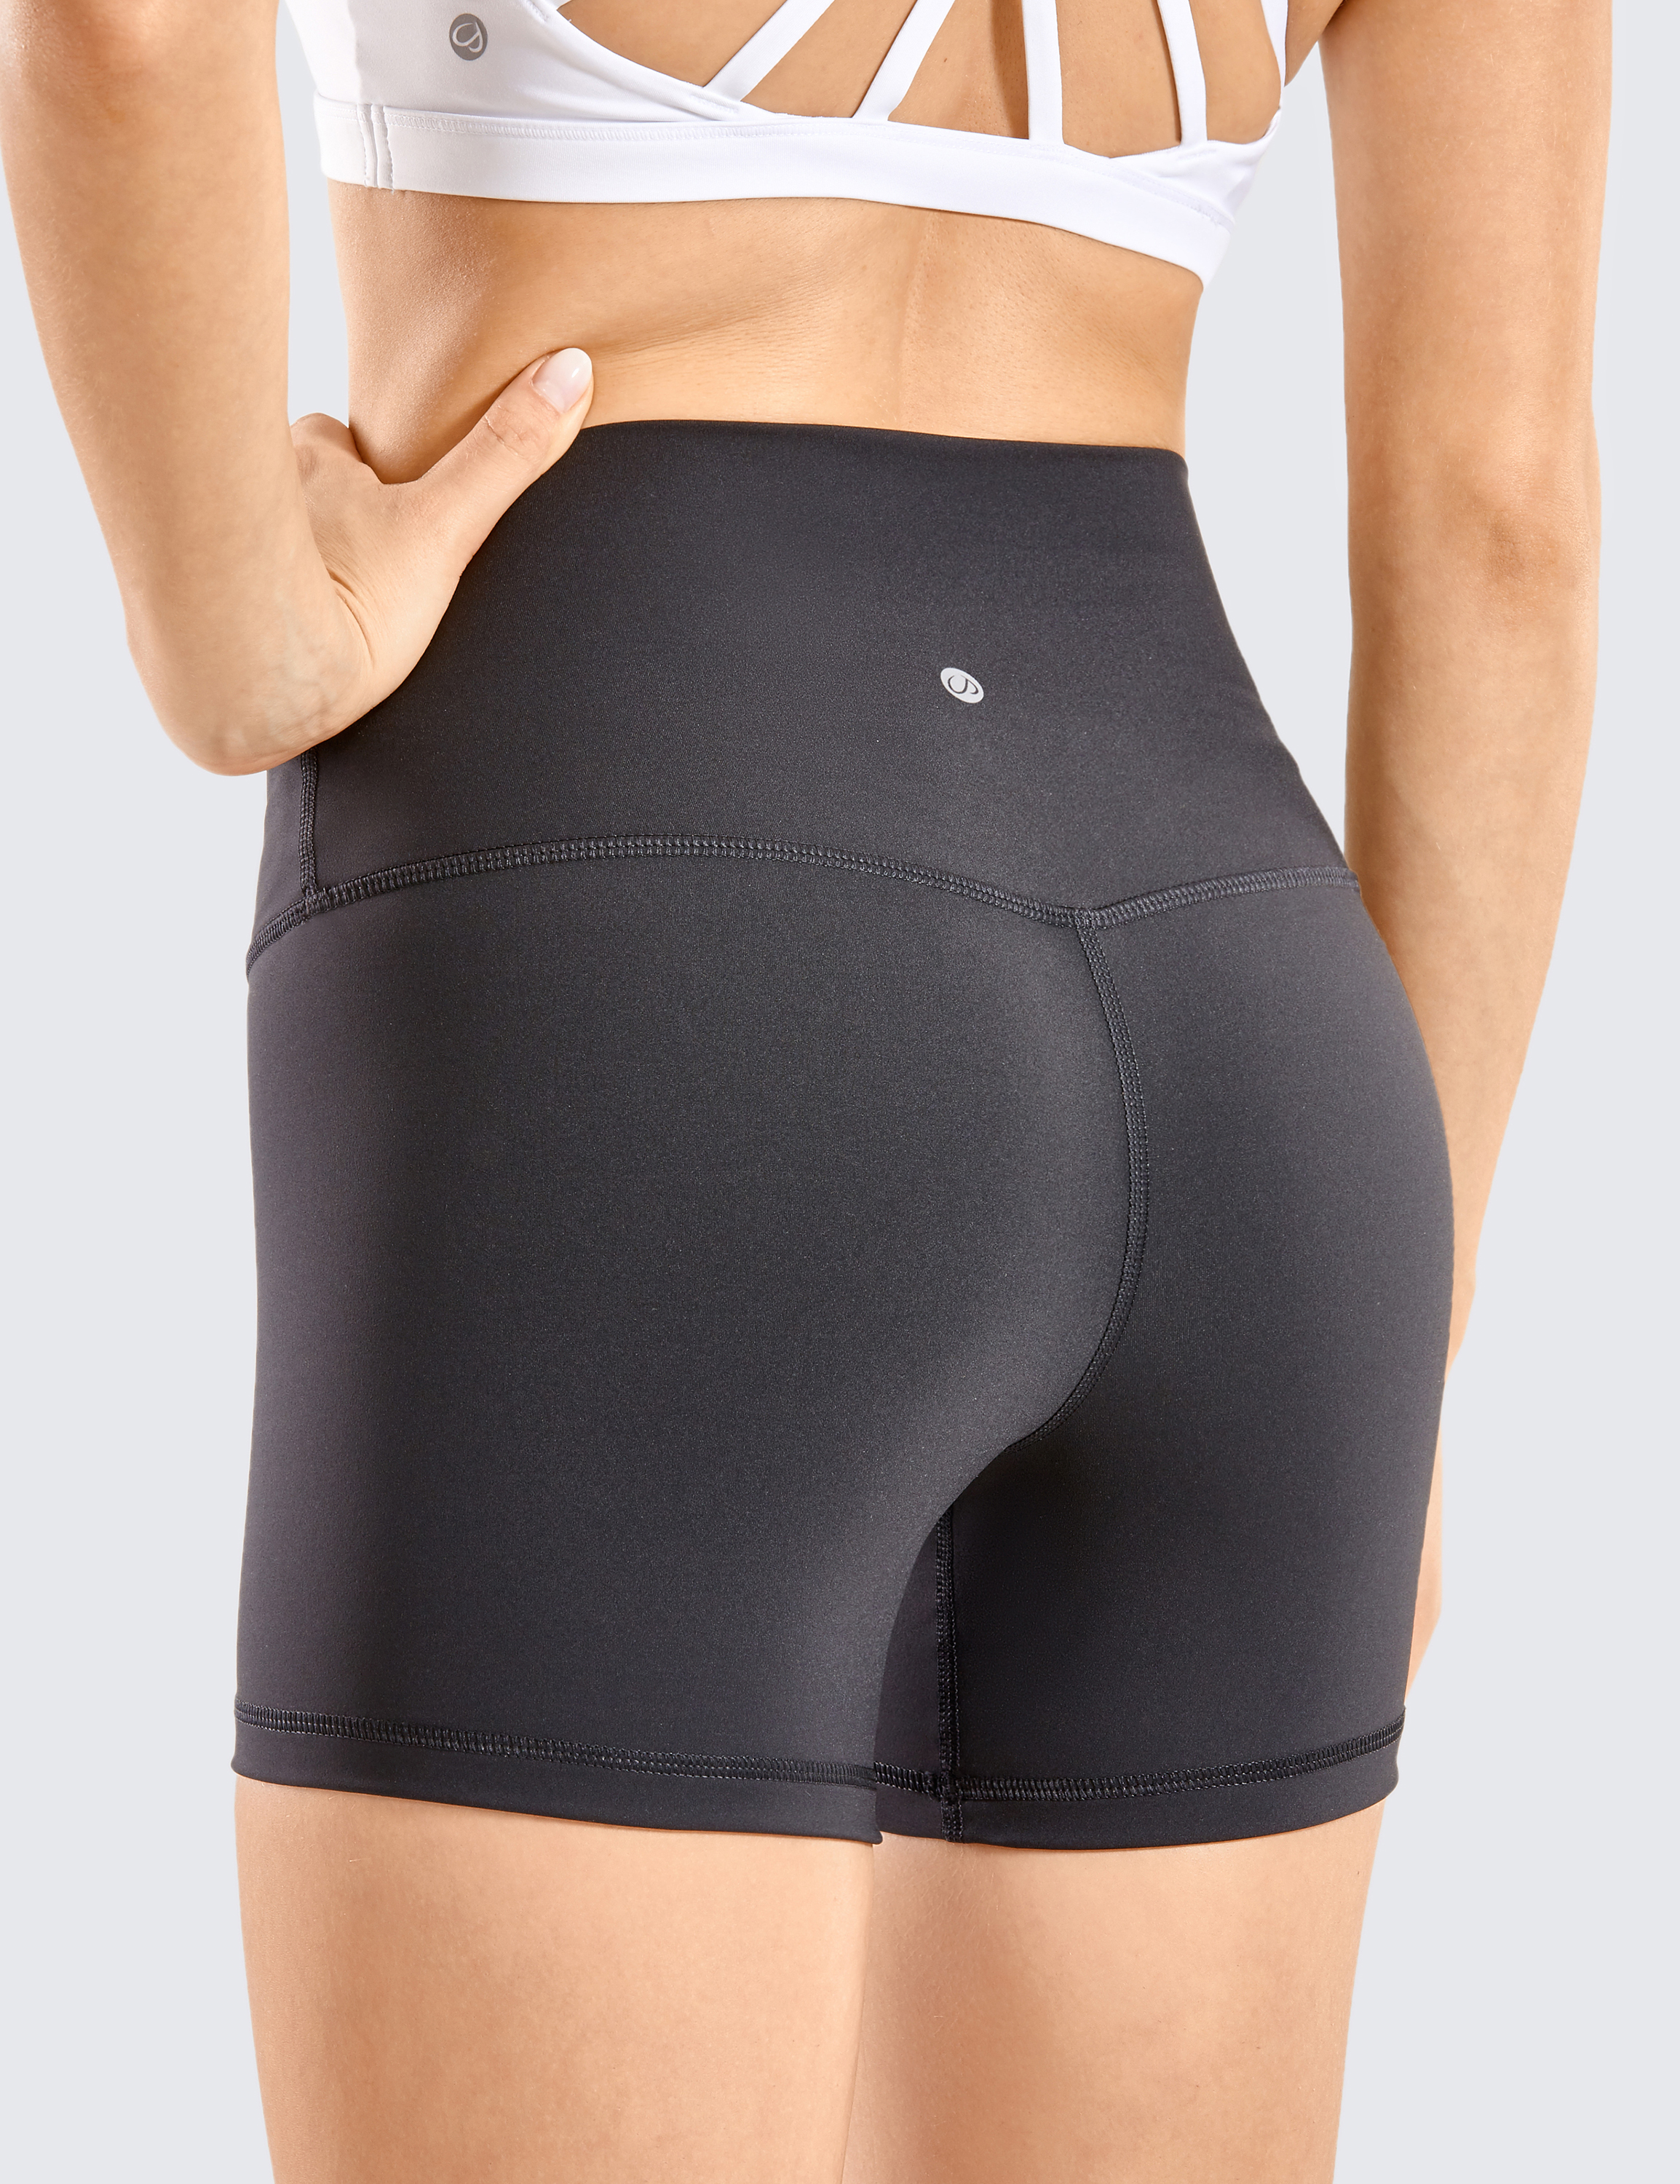 CRZ YOGA CRZ YOGA Womens ButterLuxe Biker Shorts 6 Inches - High Waisted  Workout Running Volleyball Athletic Spandex Yoga Shorts